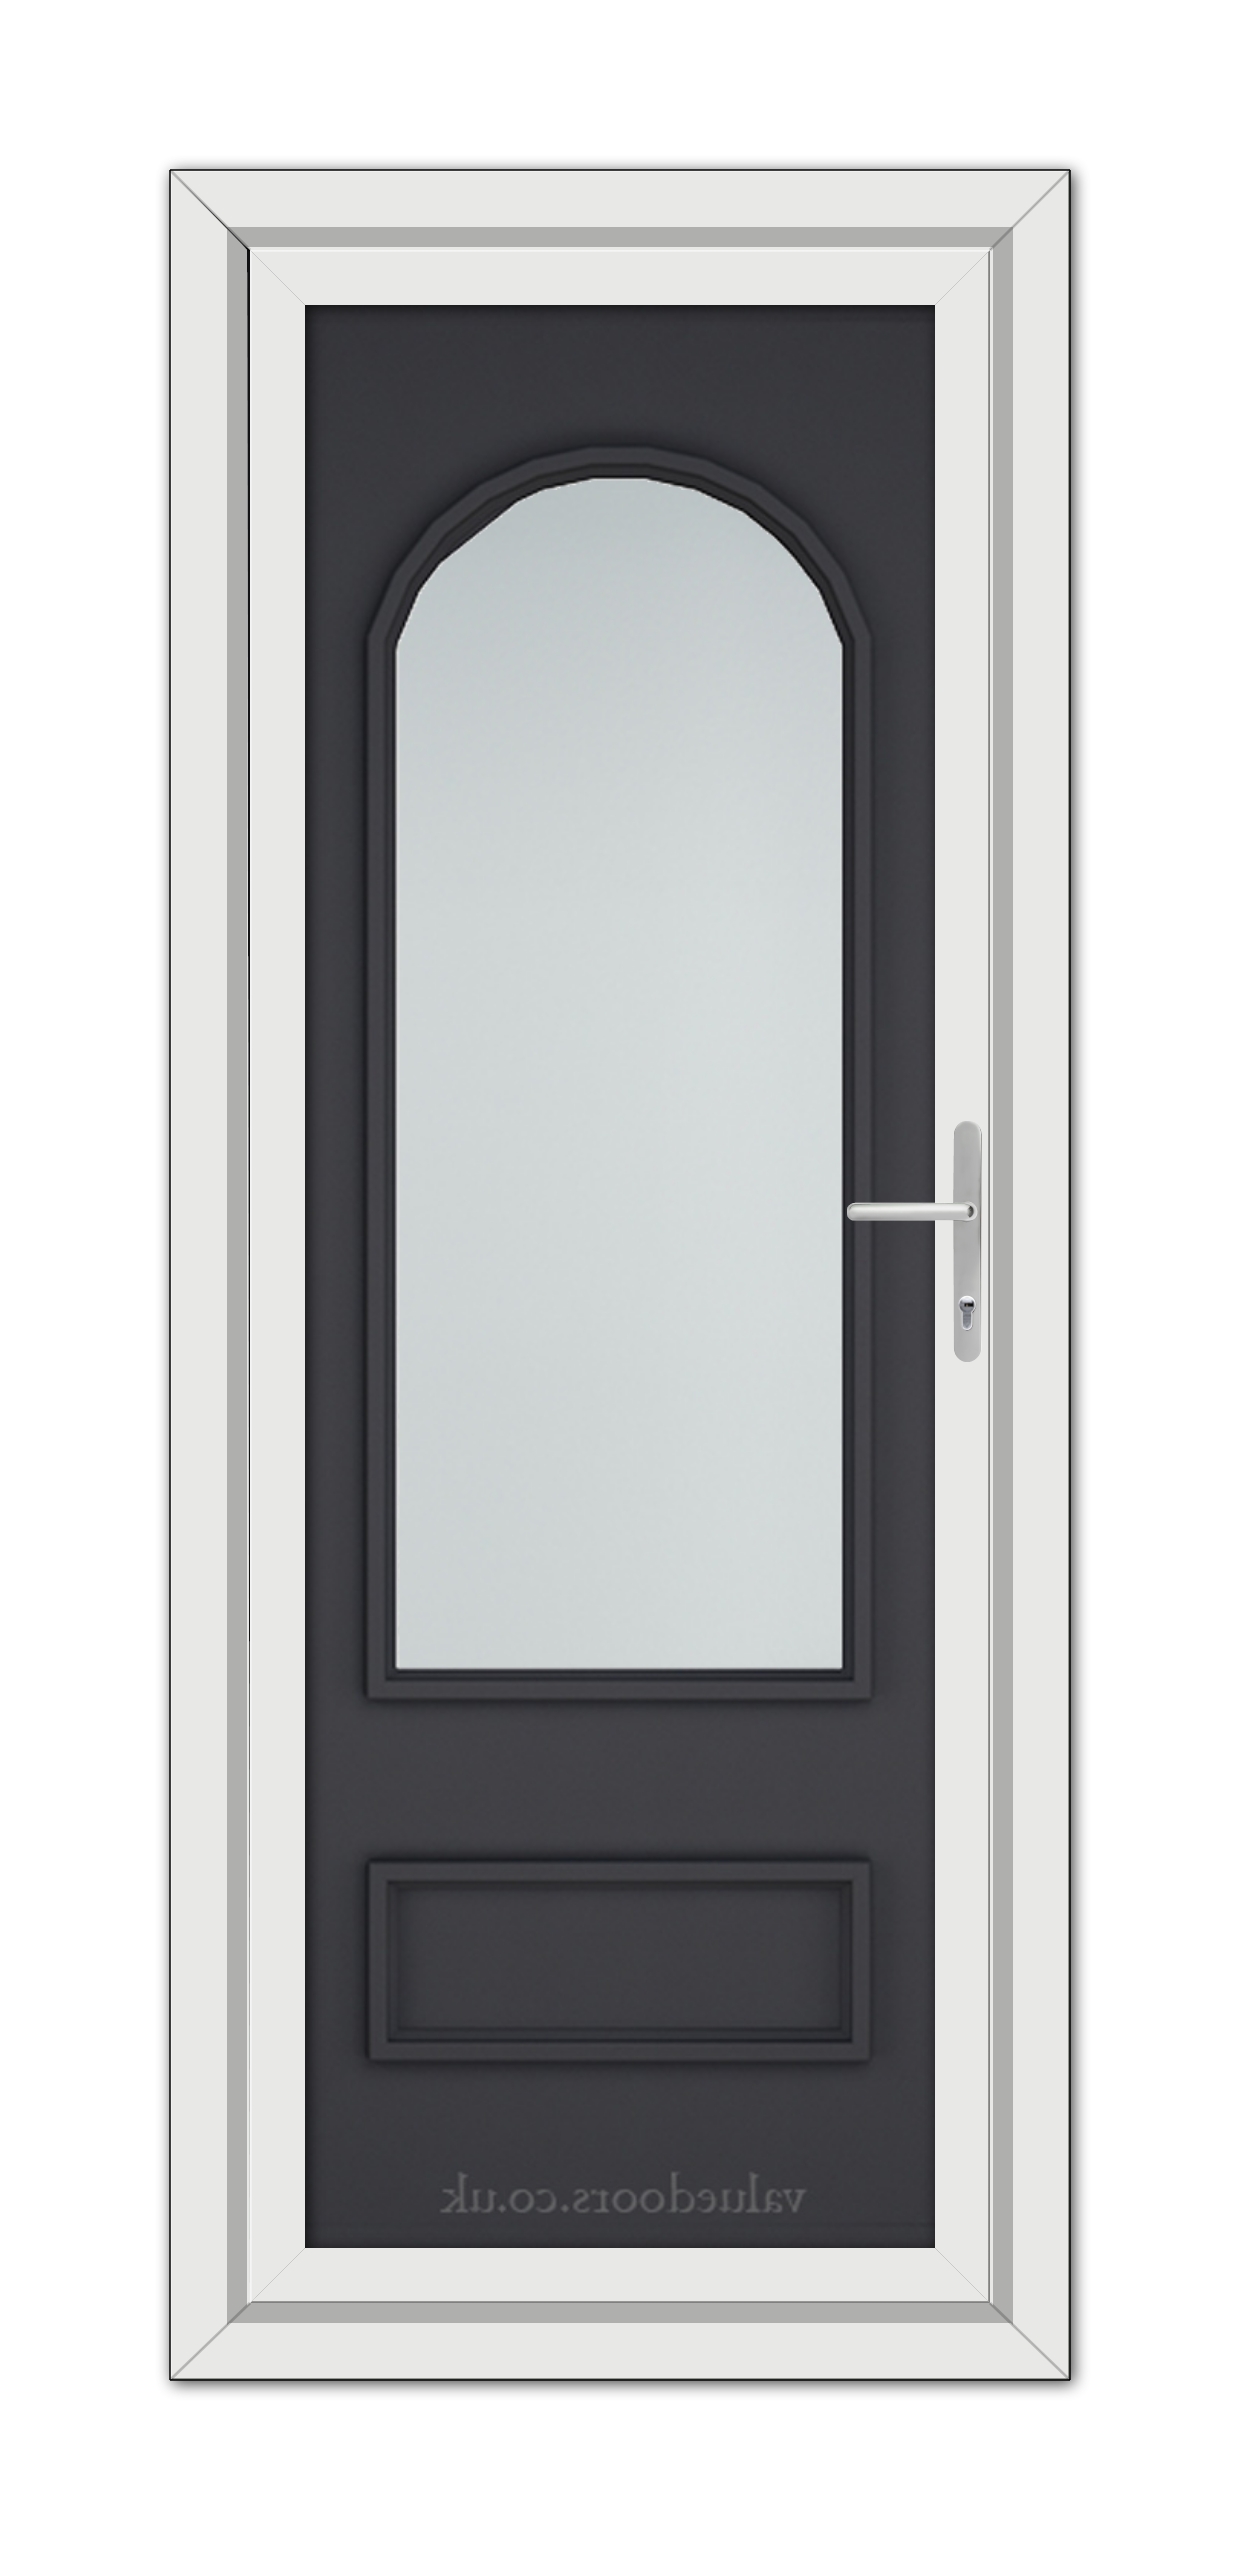 A Grey Canterbury uPVC Door featuring a gray panel with an arched window and a white frame, equipped with a metallic handle on the right.